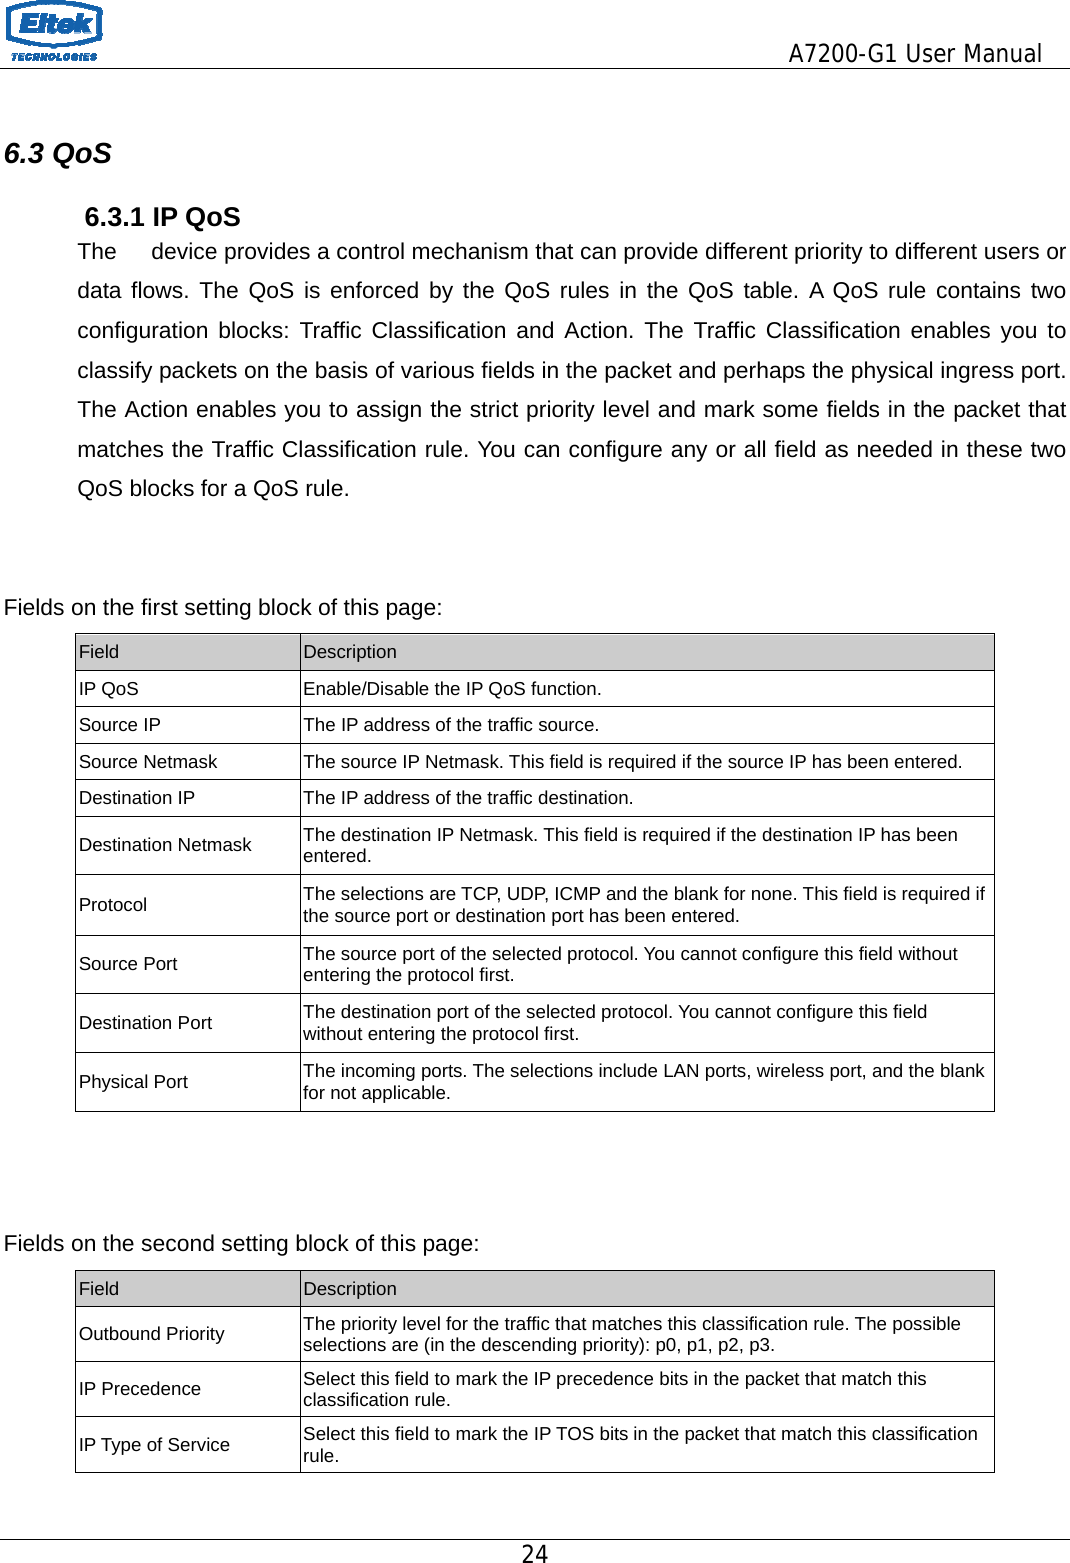                                         A7200-G1 User Manual 24   6.3 QoS       6.3.1 IP QoS    The      device provides a control mechanism that can provide different priority to different users or data flows. The QoS is enforced by the QoS rules in the QoS table. A QoS rule contains two configuration blocks: Traffic Classification and Action. The Traffic Classification enables you to classify packets on the basis of various fields in the packet and perhaps the physical ingress port. The Action enables you to assign the strict priority level and mark some fields in the packet that matches the Traffic Classification rule. You can configure any or all field as needed in these two QoS blocks for a QoS rule.   Fields on the first setting block of this page: Field  Description IP QoS  Enable/Disable the IP QoS function. Source IP  The IP address of the traffic source. Source Netmask  The source IP Netmask. This field is required if the source IP has been entered. Destination IP  The IP address of the traffic destination. Destination Netmask  The destination IP Netmask. This field is required if the destination IP has been entered. Protocol  The selections are TCP, UDP, ICMP and the blank for none. This field is required if the source port or destination port has been entered. Source Port  The source port of the selected protocol. You cannot configure this field without entering the protocol first. Destination Port  The destination port of the selected protocol. You cannot configure this field without entering the protocol first. Physical Port  The incoming ports. The selections include LAN ports, wireless port, and the blank for not applicable.    Fields on the second setting block of this page: Field  Description Outbound Priority  The priority level for the traffic that matches this classification rule. The possible selections are (in the descending priority): p0, p1, p2, p3. IP Precedence  Select this field to mark the IP precedence bits in the packet that match this classification rule. IP Type of Service  Select this field to mark the IP TOS bits in the packet that match this classification rule. 